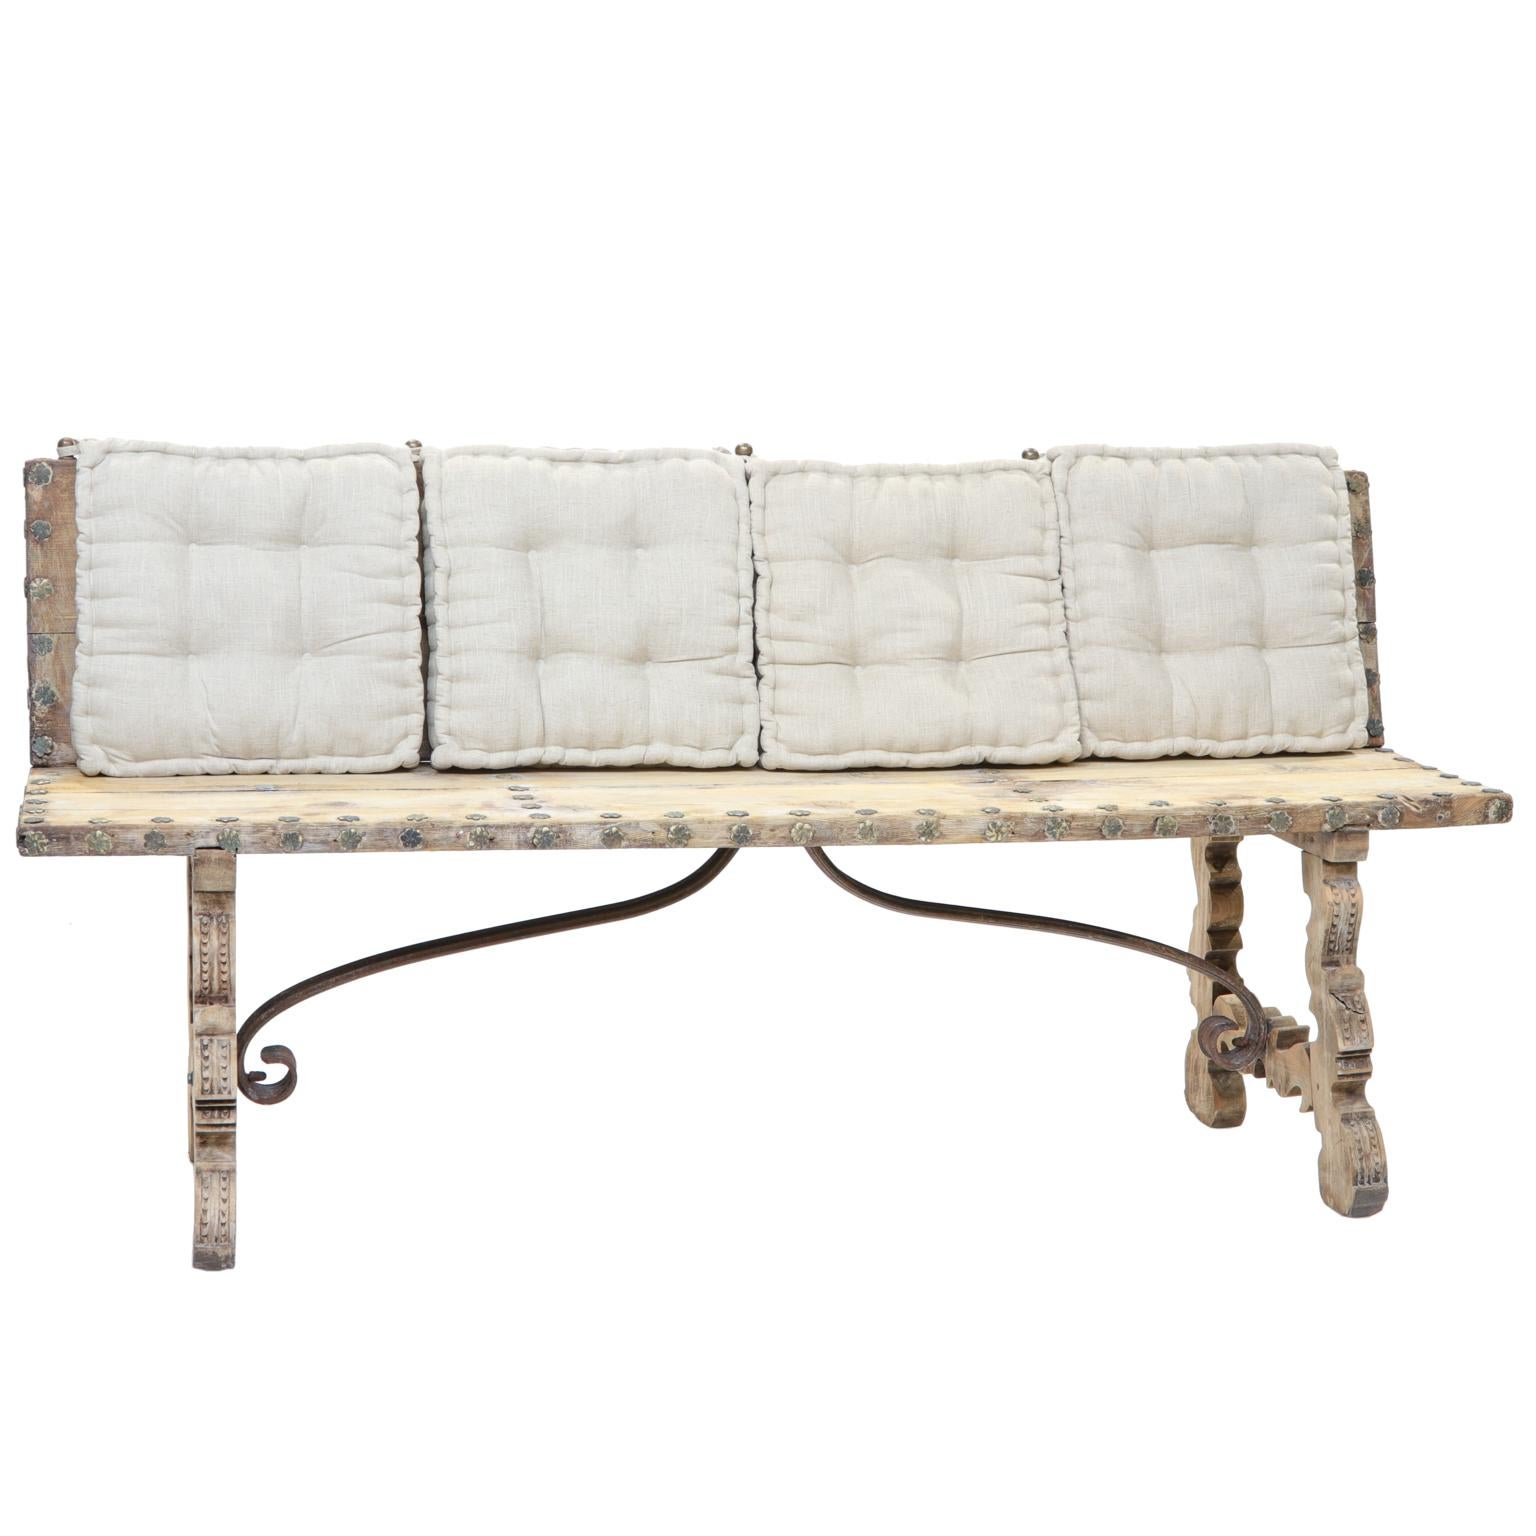 A 19th century Spanish bench. This bench was most likely covered at one point. It has been taken down to the frame and stripped and bleached. Nailheads are old and give this a great look. Carvings adorn the legs and are connected by an iron